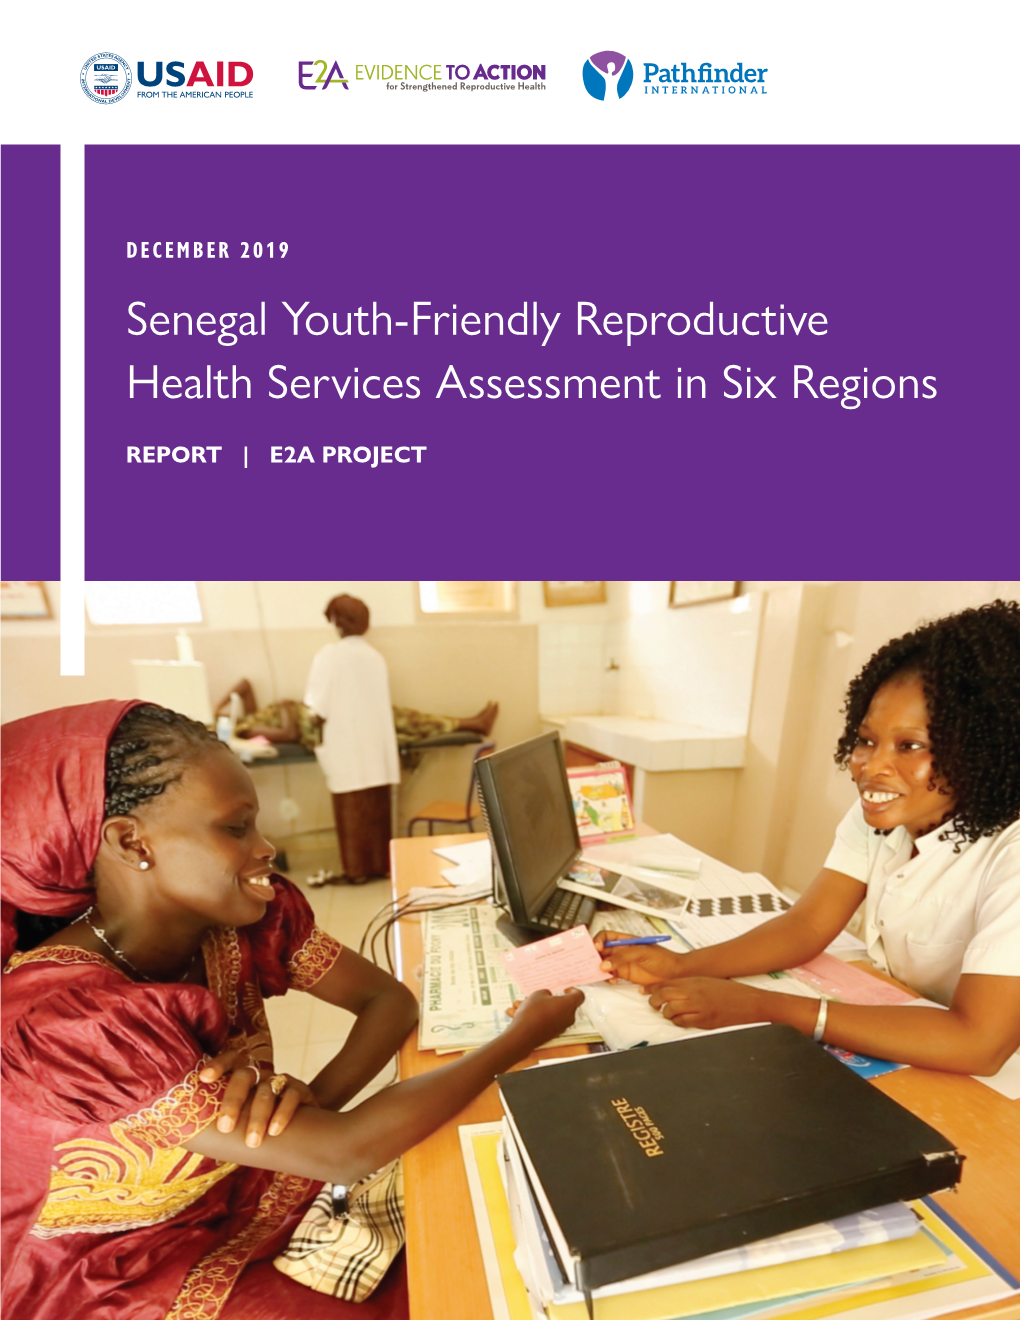 Senegal Youth-Friendly Reproductive Health Services Assessment in Six Regions